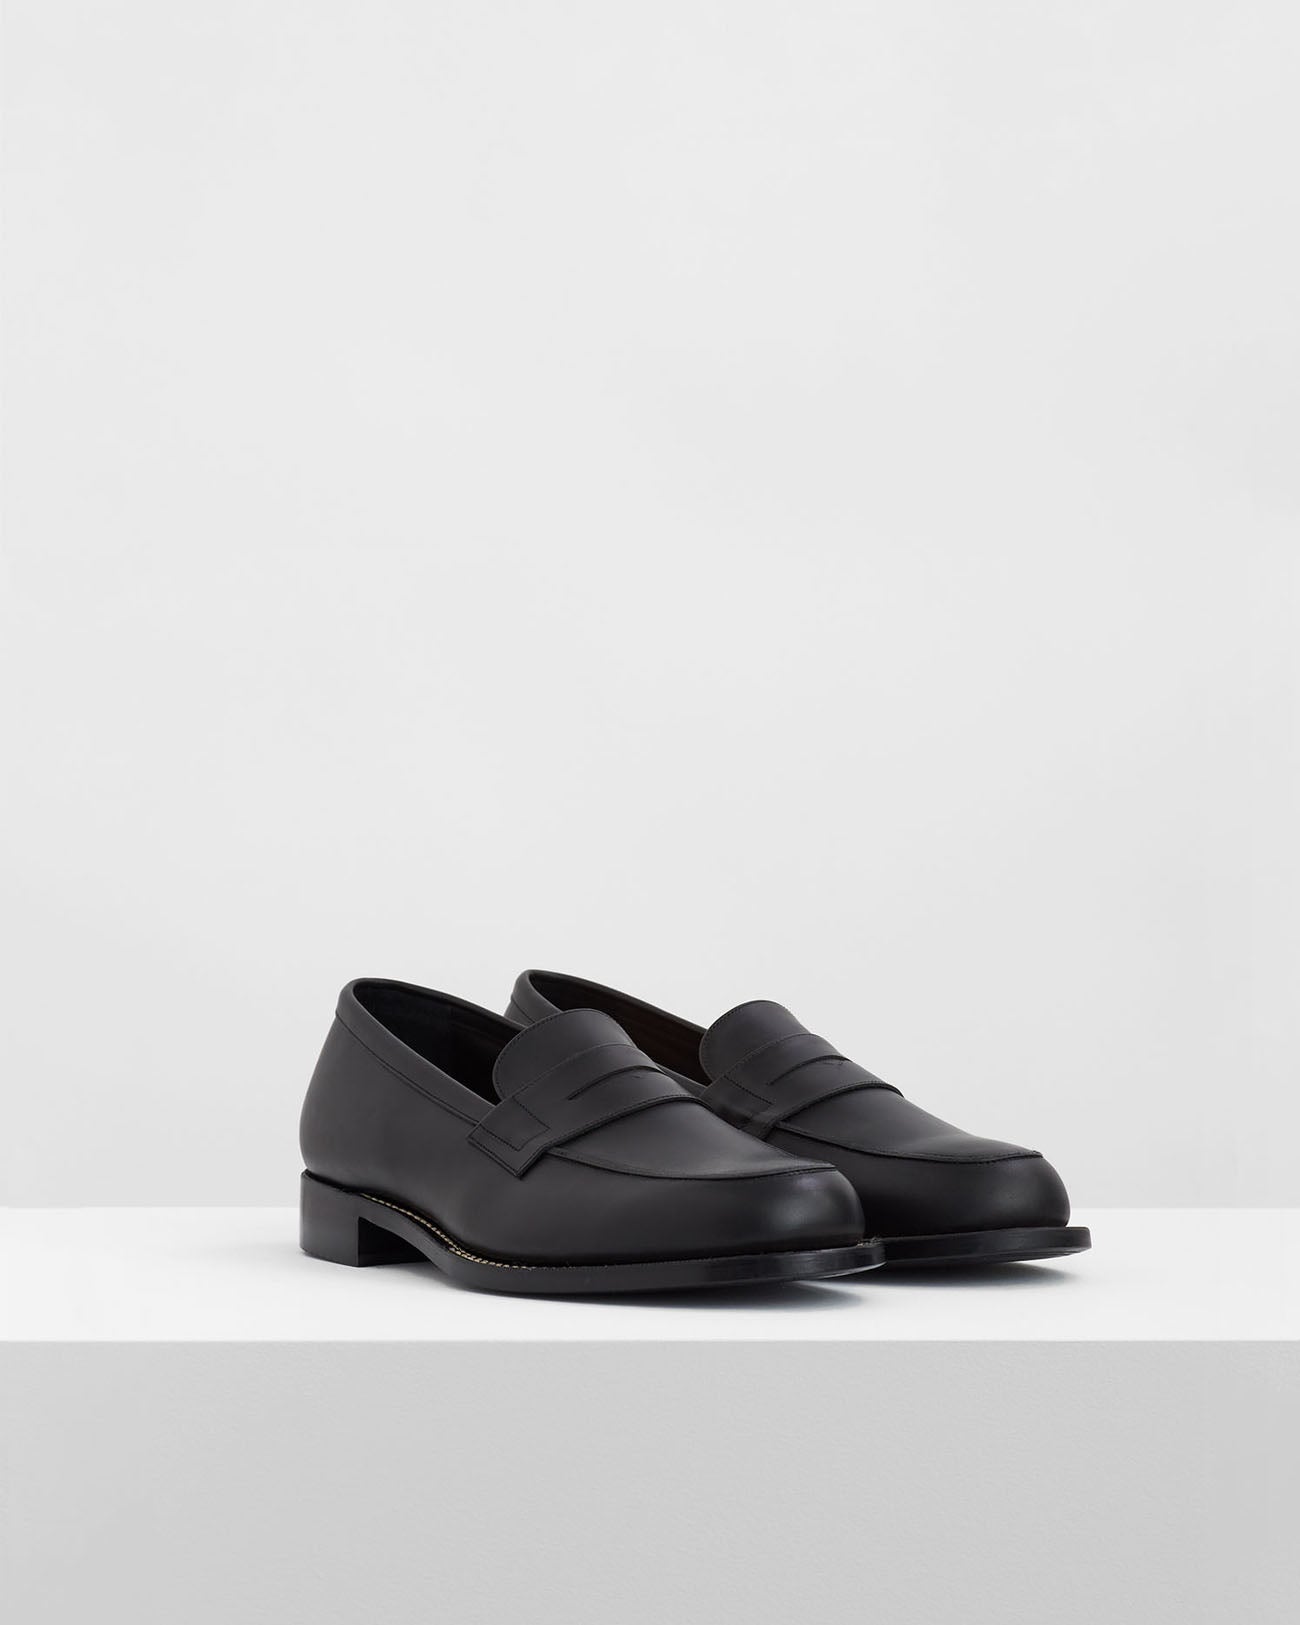 Coin Loafers - black - FAB4 ONLINE STORE